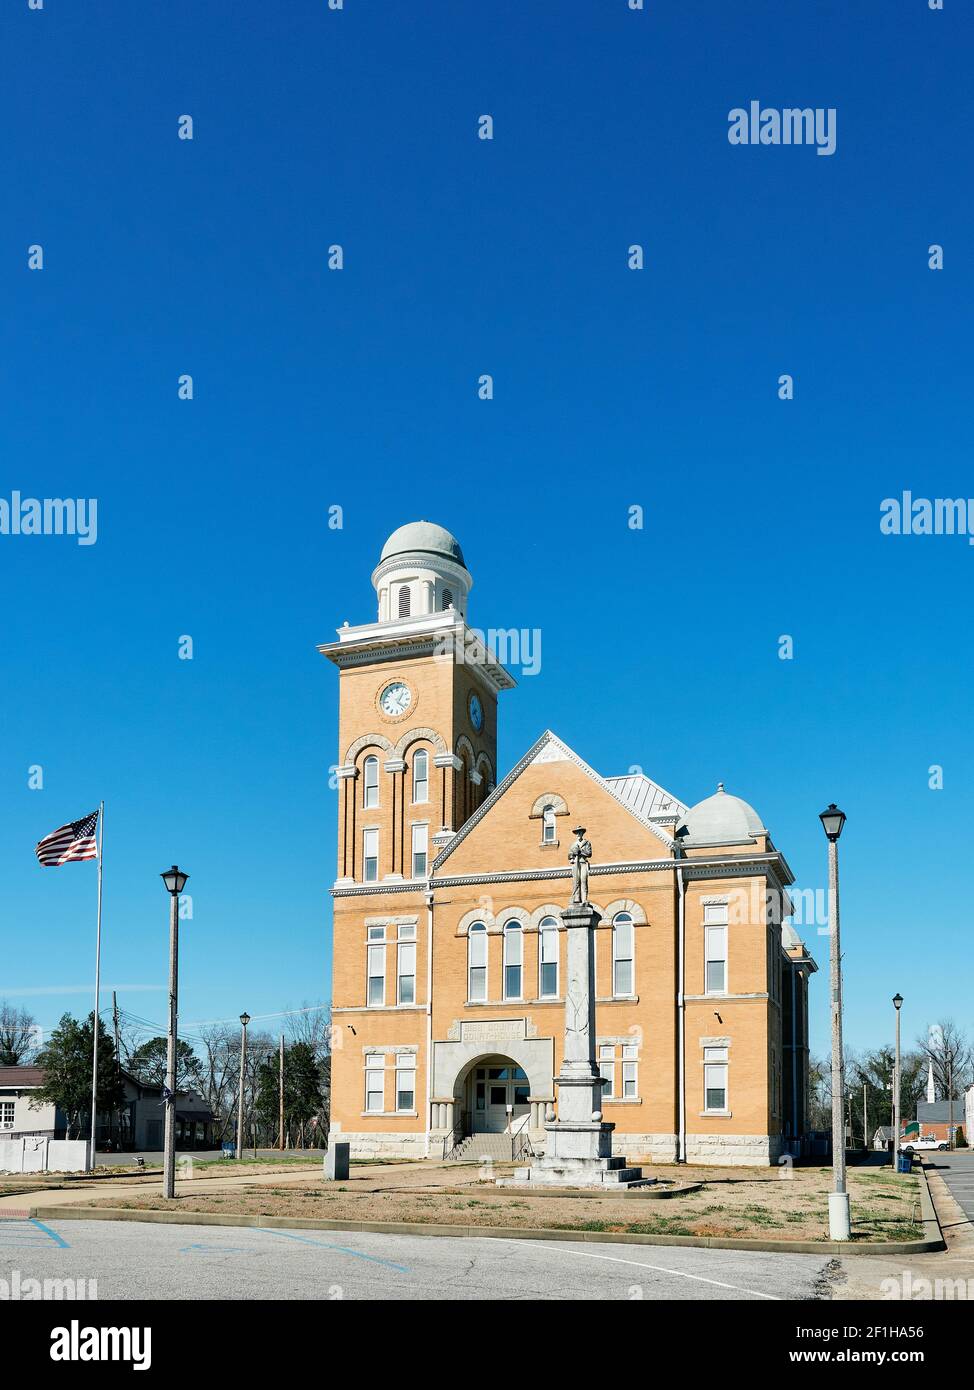 Bibb County Courthouse, of Neo-Classical Revival architecture, is situated in Centerville Alabama, USA. Stock Photo